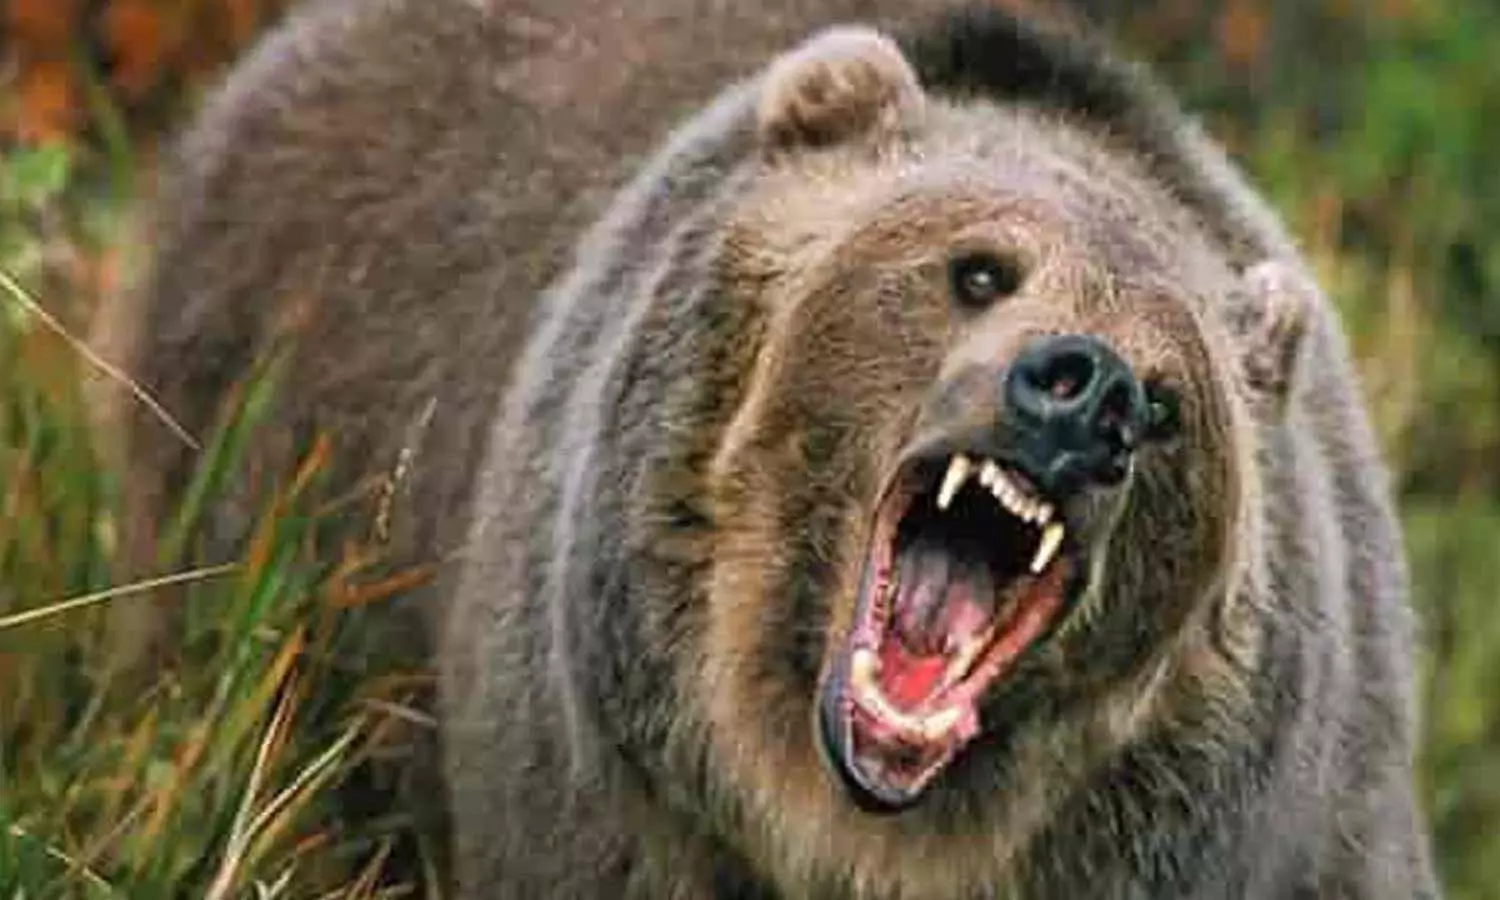 The bear attacked the woodcutter in Chitrakoot, survived with great difficulty